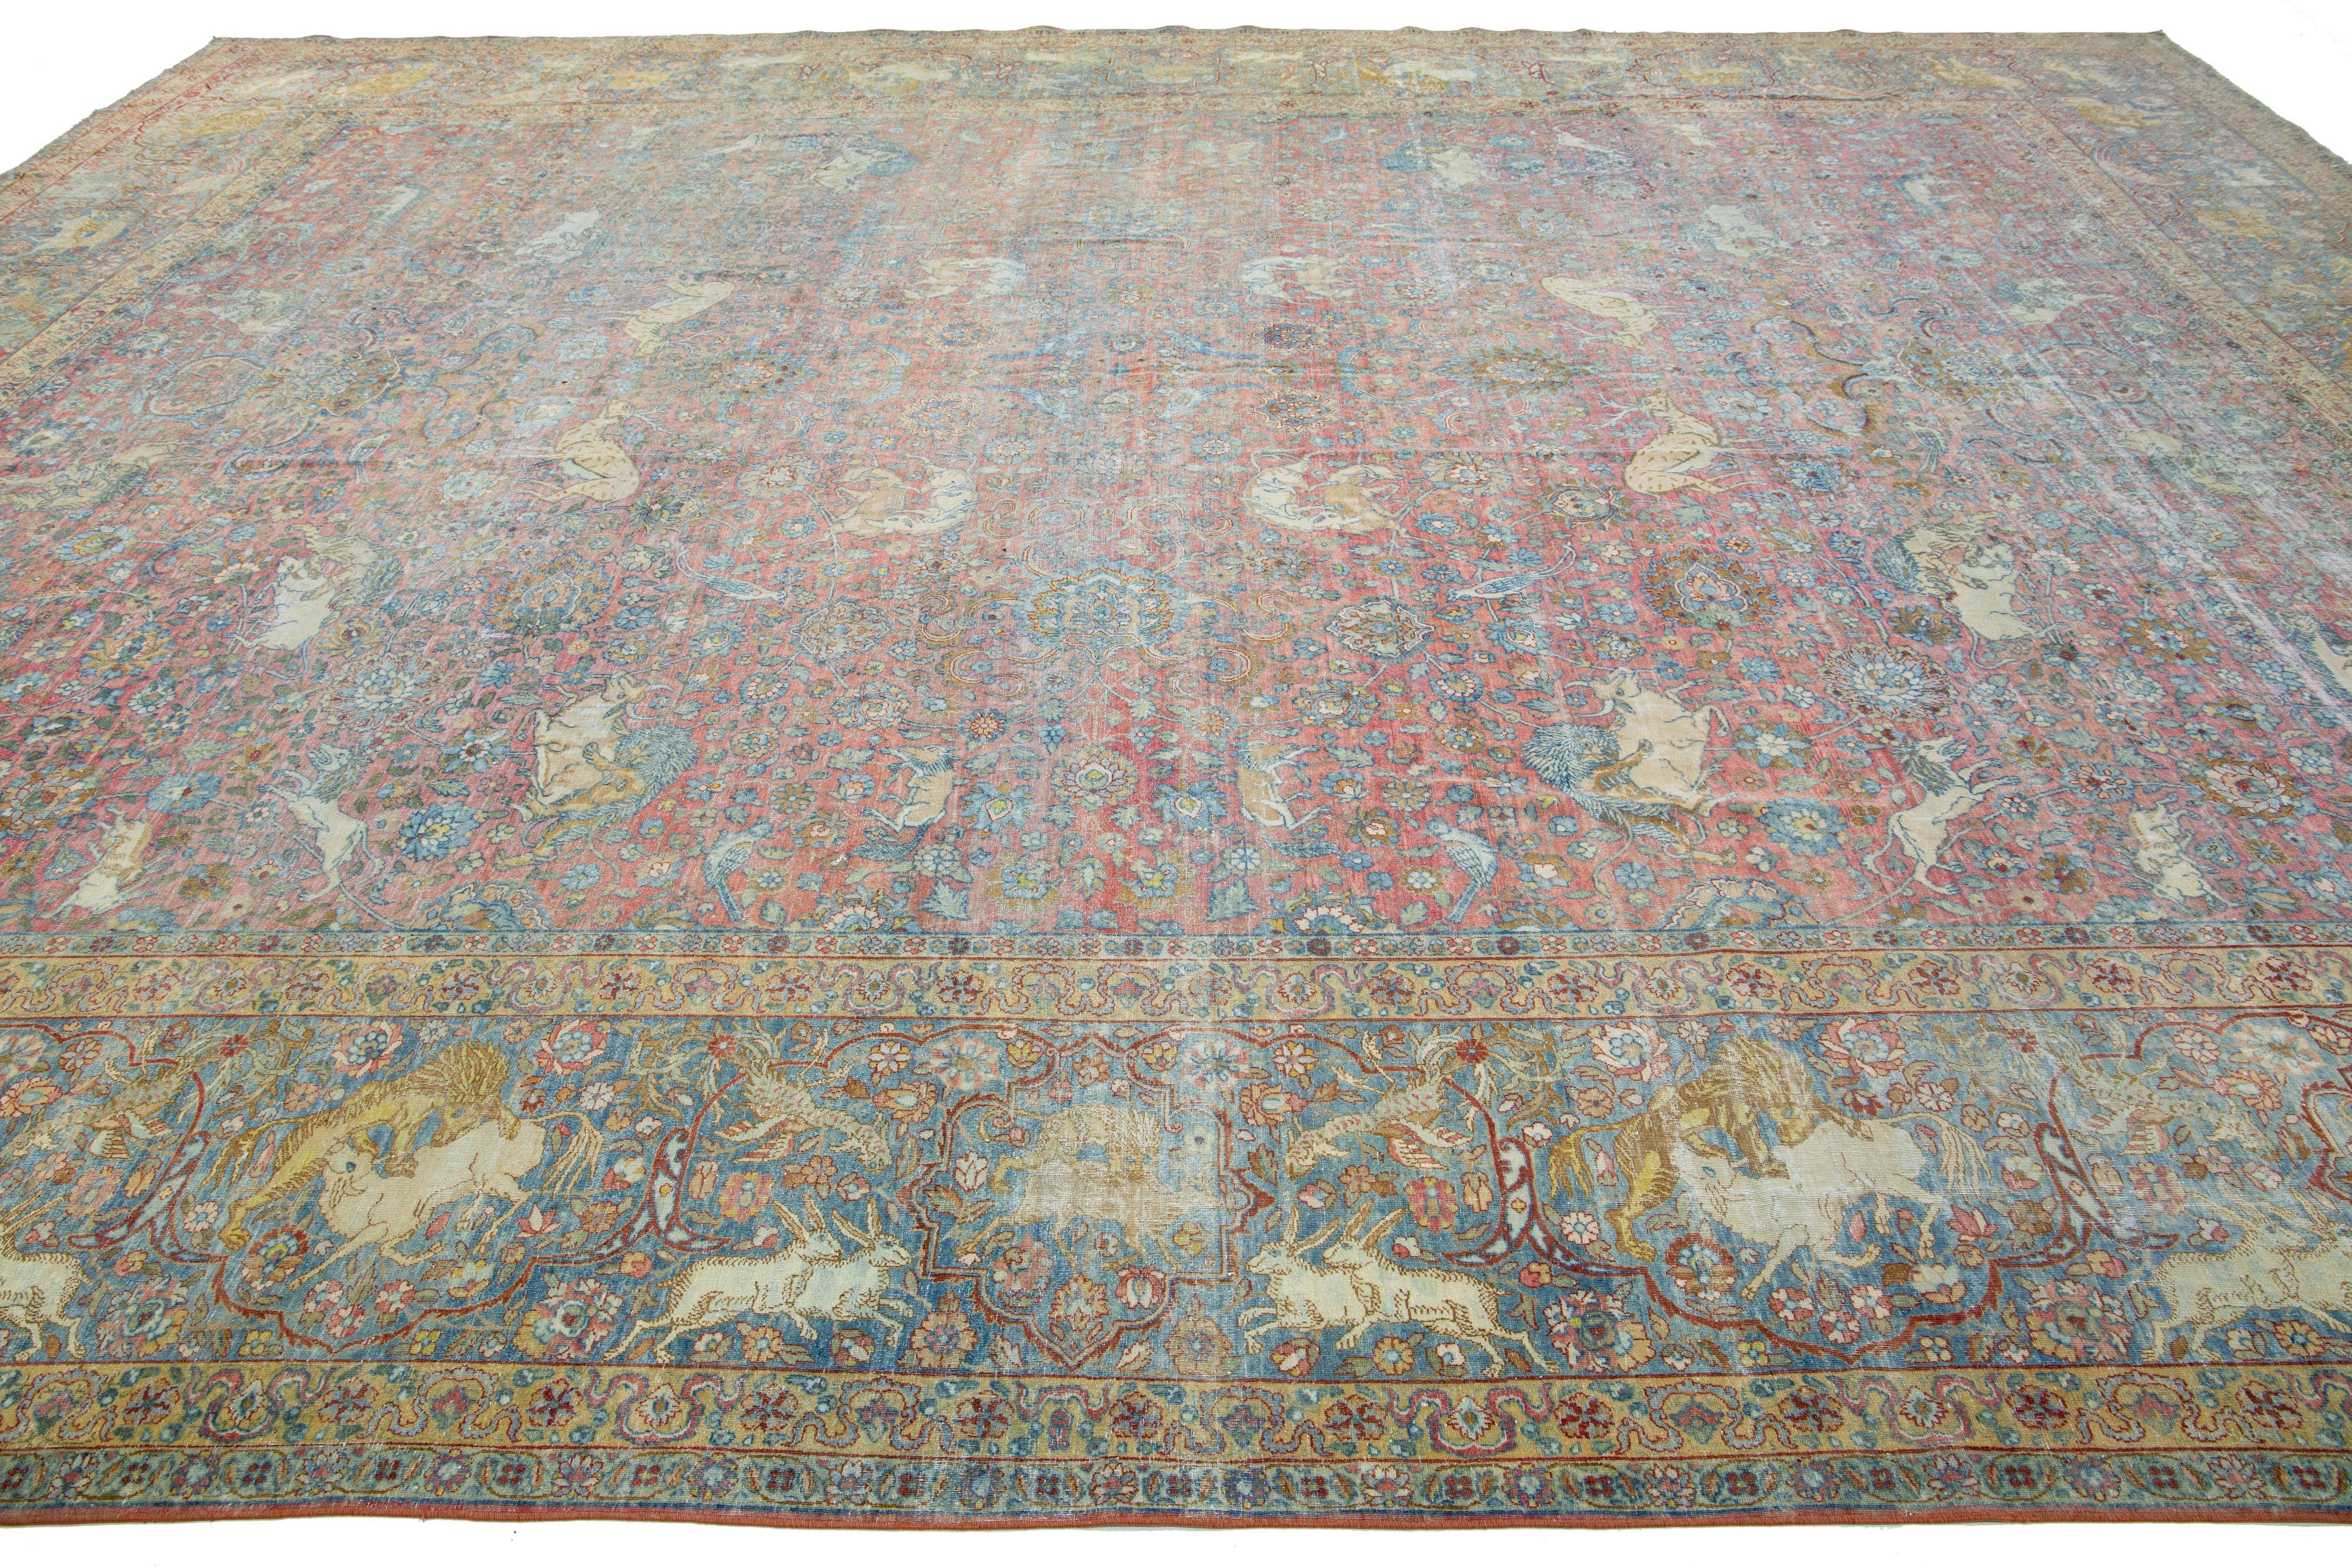 Allover Designed Antique Persian Tabriz Wool Rug Handmade IN Red-Rust Color  In Excellent Condition For Sale In Norwalk, CT